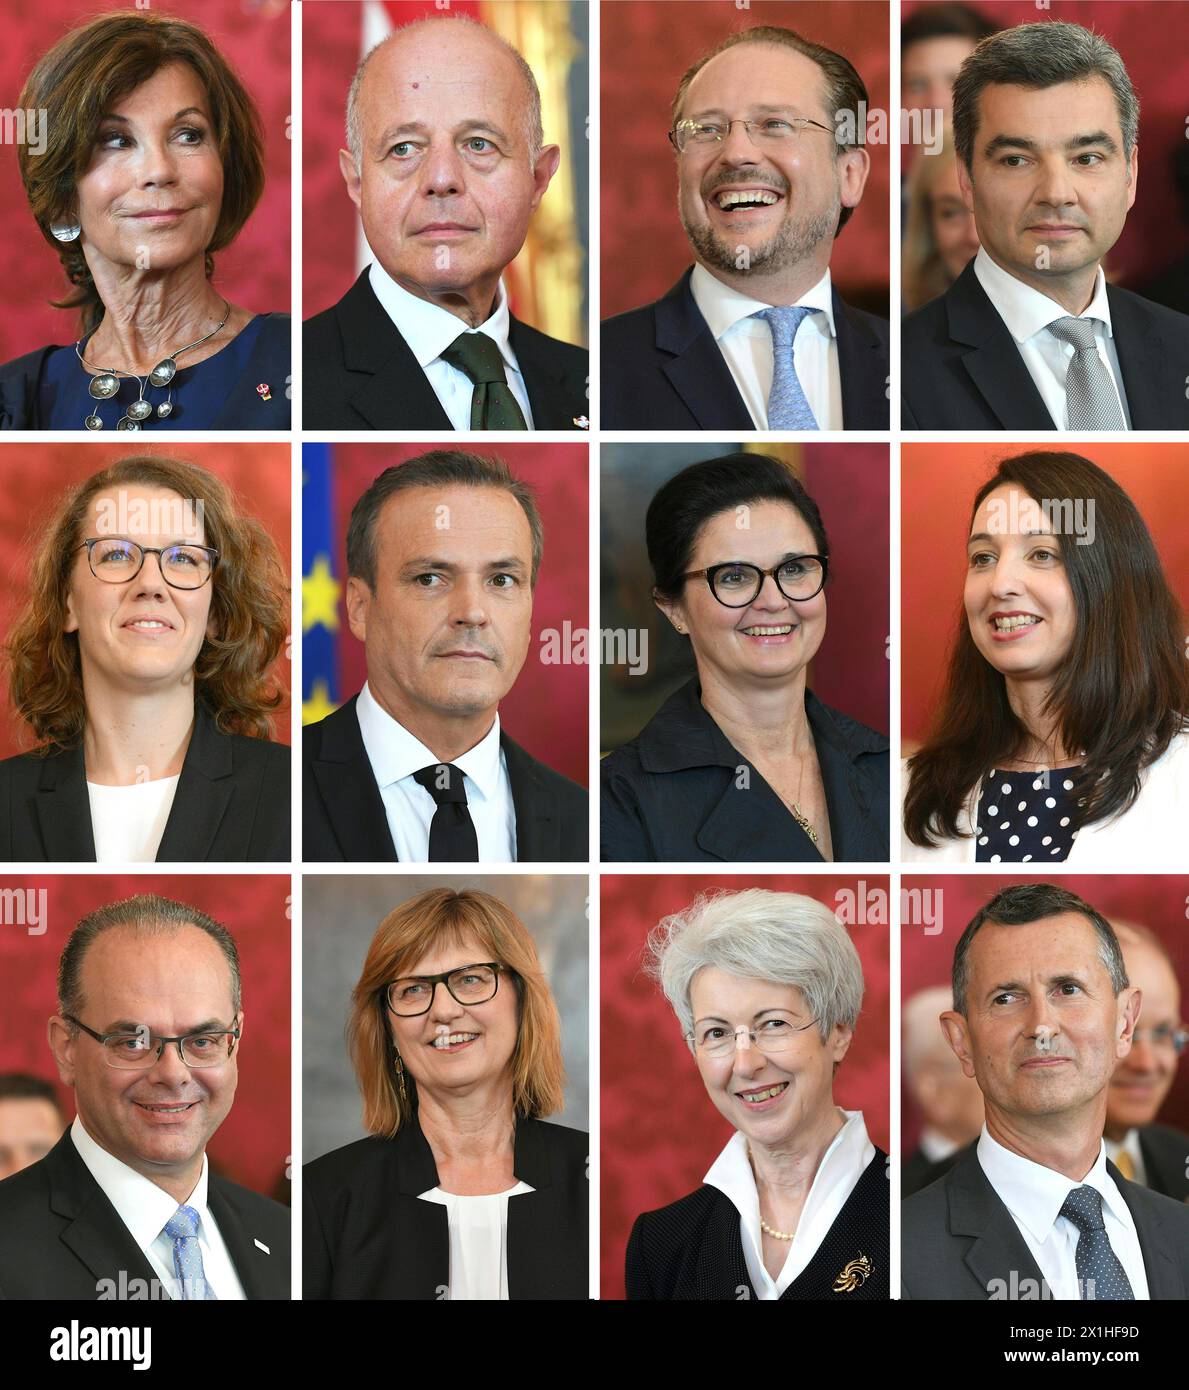 (COMBO) This combination created on June 3, 2019 of pictures taken in Vienna shows members of Austria's new interim government (top row, L-R) Chancellor Brigitte Bierlein, vice-chancellor and justice minister Clemens Jabloner, foreign minister Alexander Schallenberg and interior minister Wolfgang Peschorn; (middle row, L-R) education minister Iris Eliisa Rauskala, finance minister Eduard Mueller, labour minister Brigitte Zarfl and minister for women Ines Stilling; (bottom row, L-R) transport minister Andreas Reichhardt, minister for tourism and sustainability Maria Patek, economy minister Elis Stock Photo